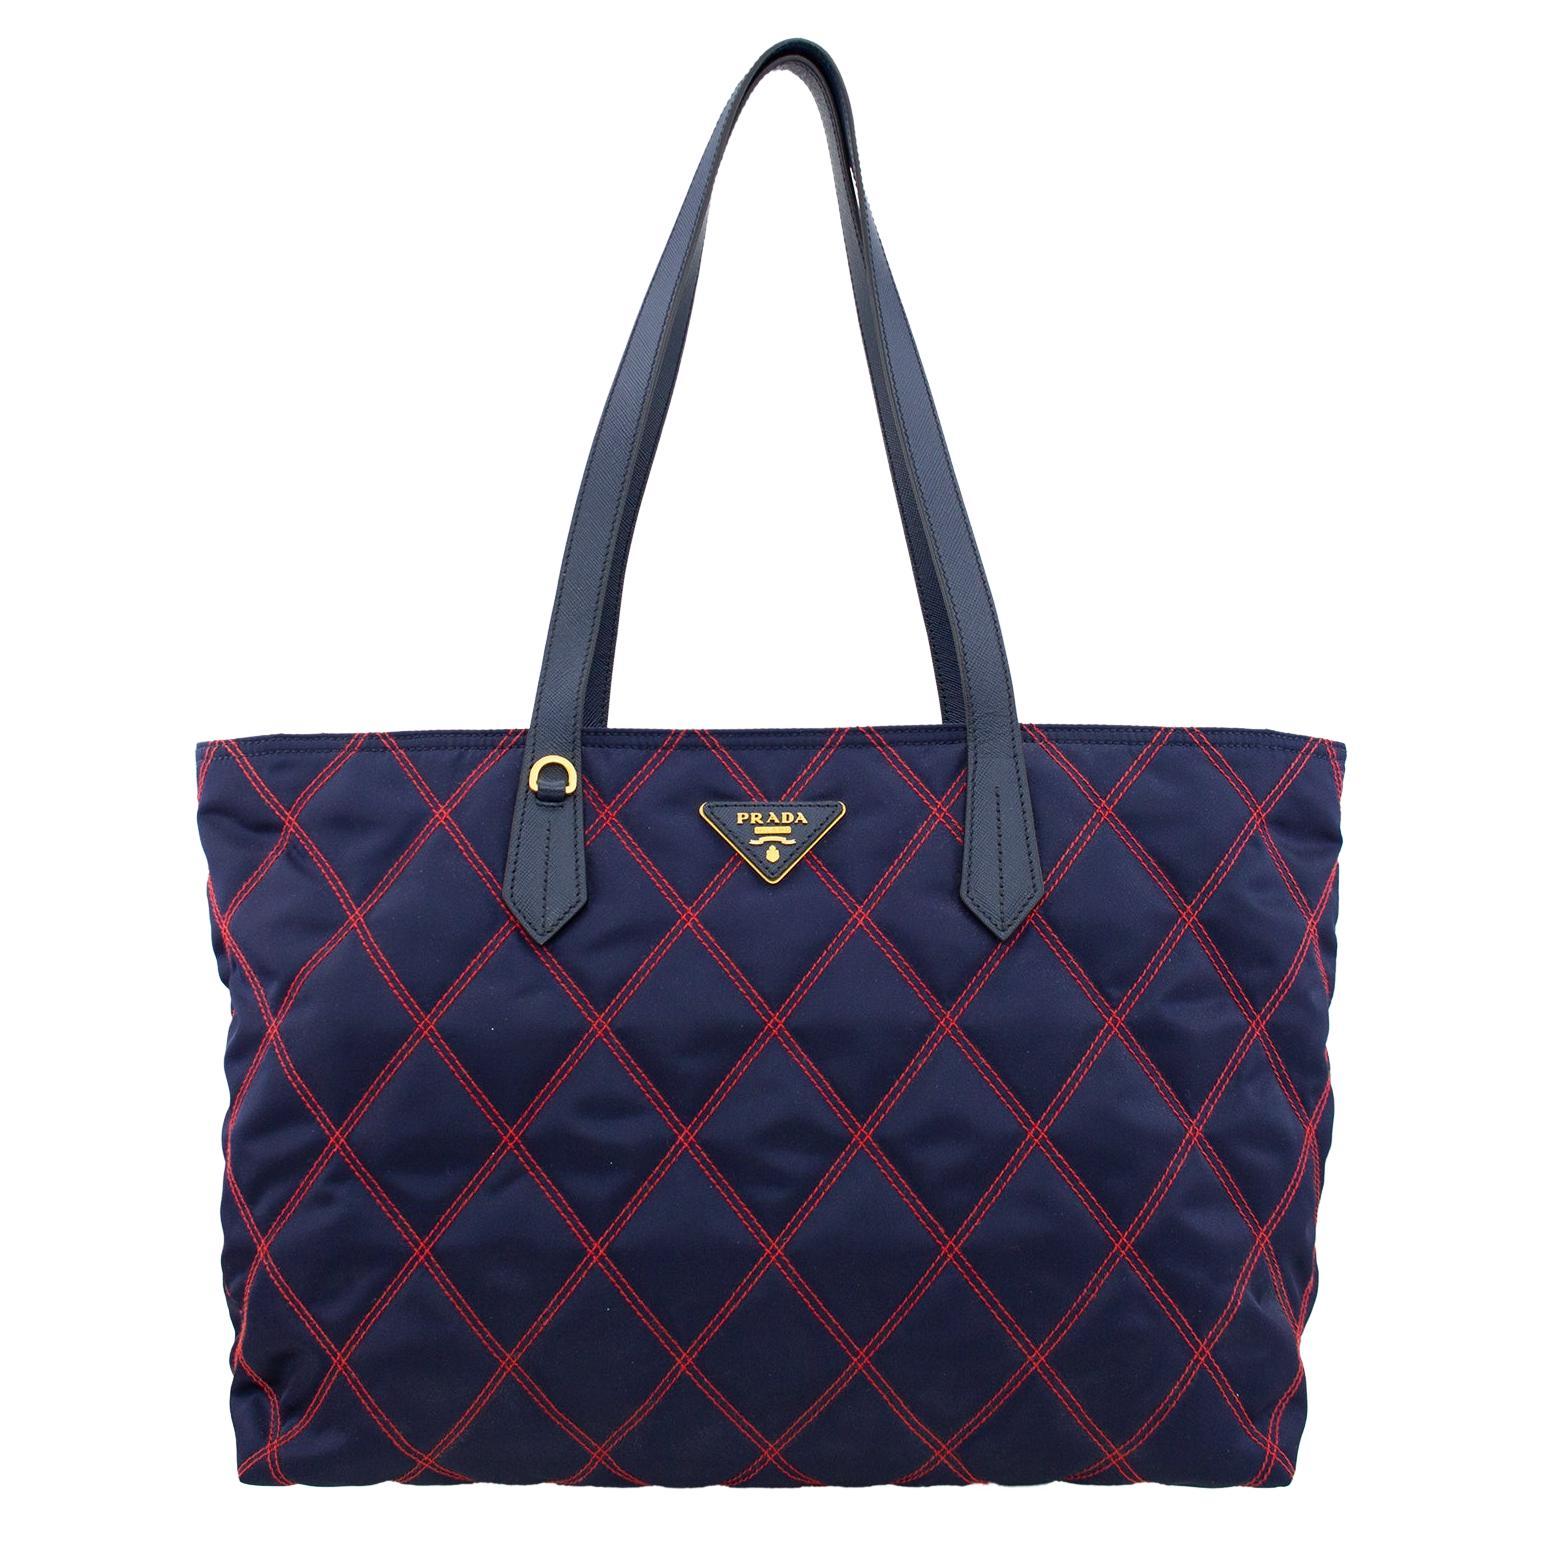 1990s Prada Navy Blue and Red Quilted Tessuto Impunto Tote Bag 